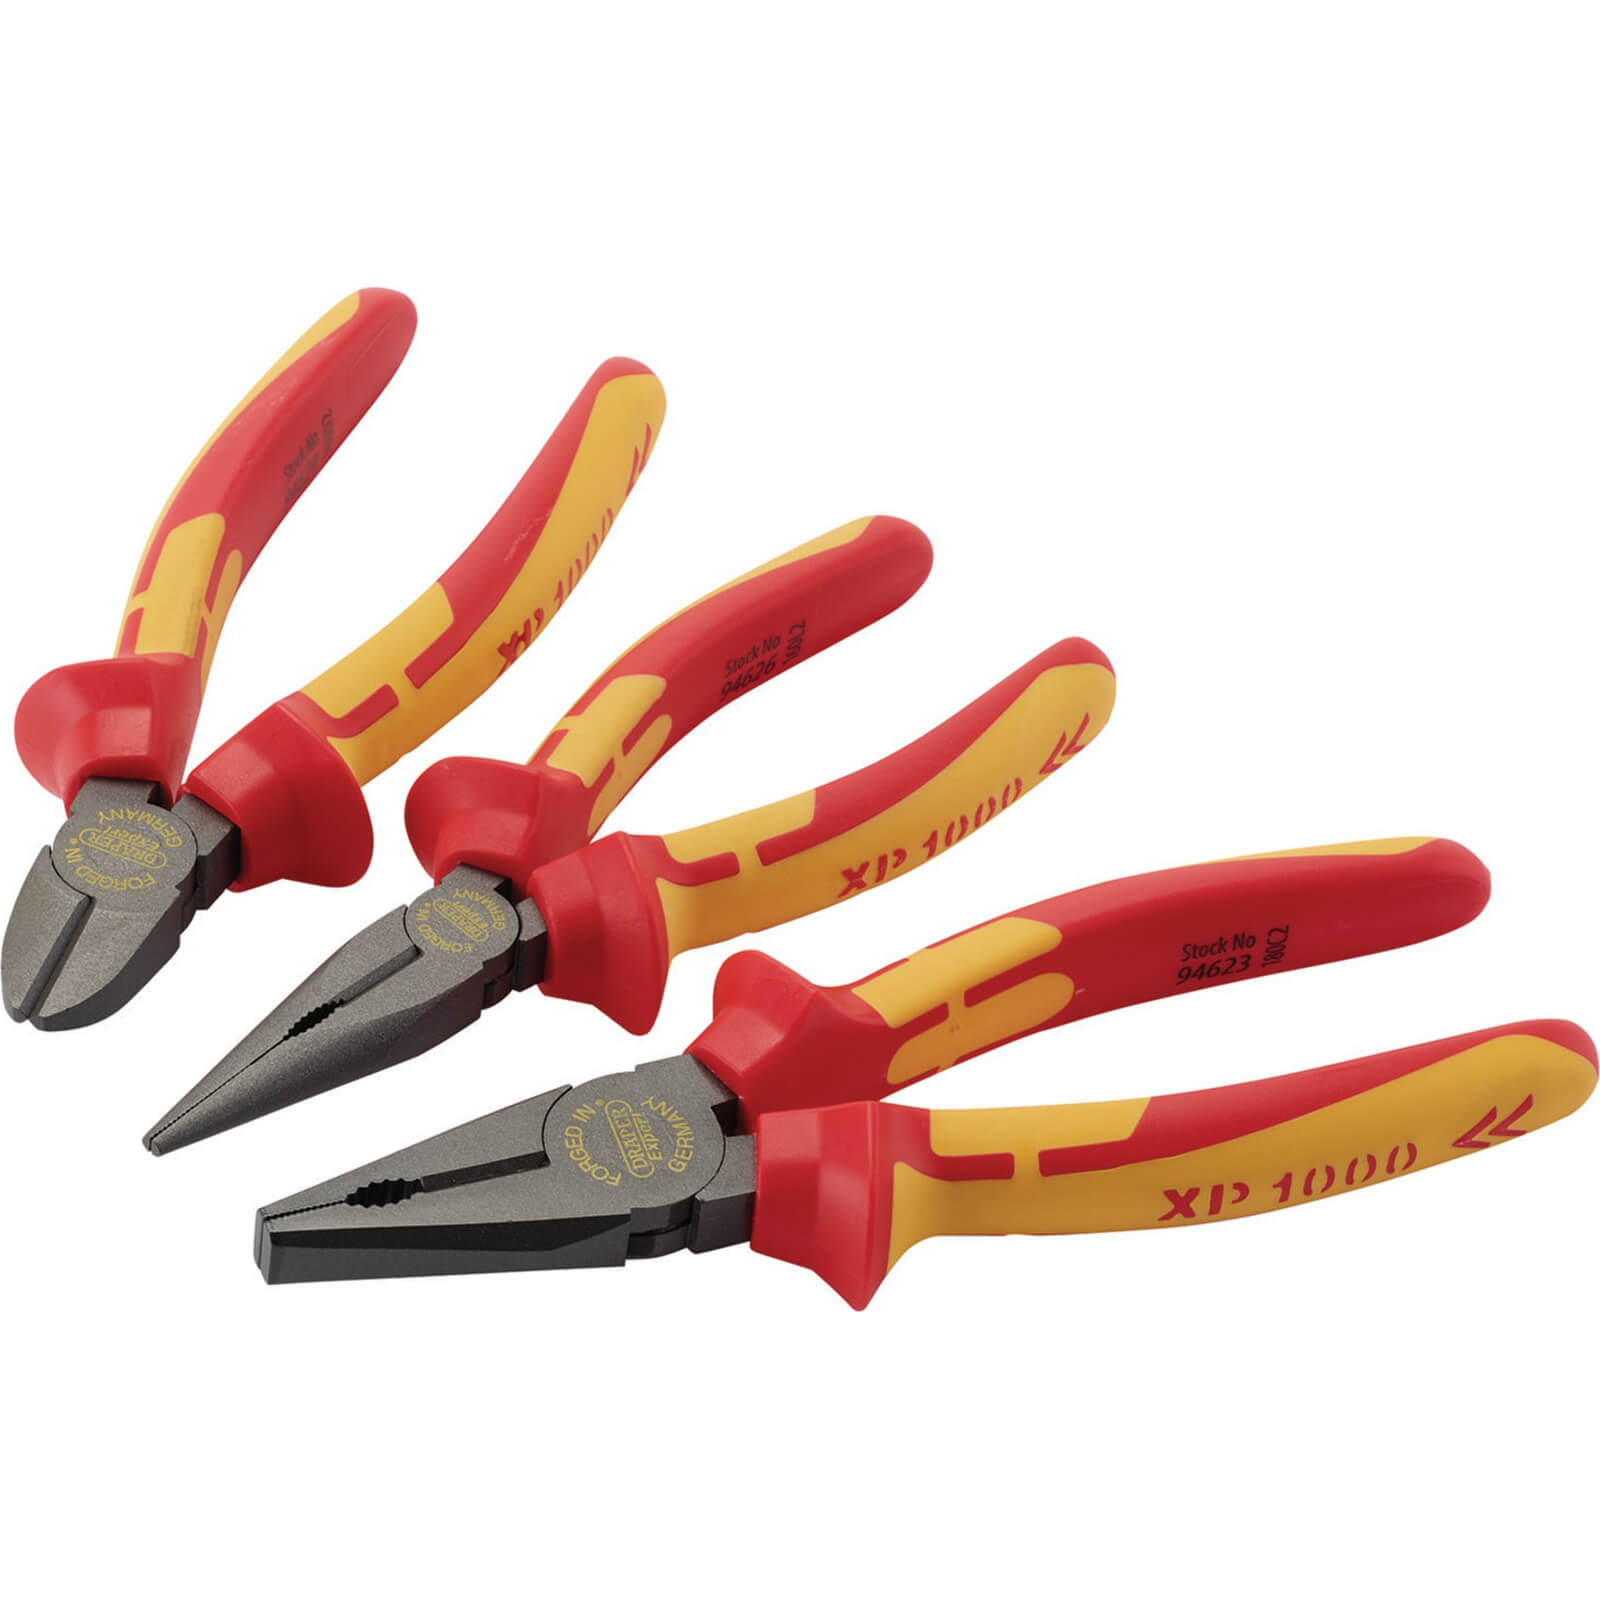 Photo of Draper 3 Piece Xp1000 Vde Insulated Pliers Set